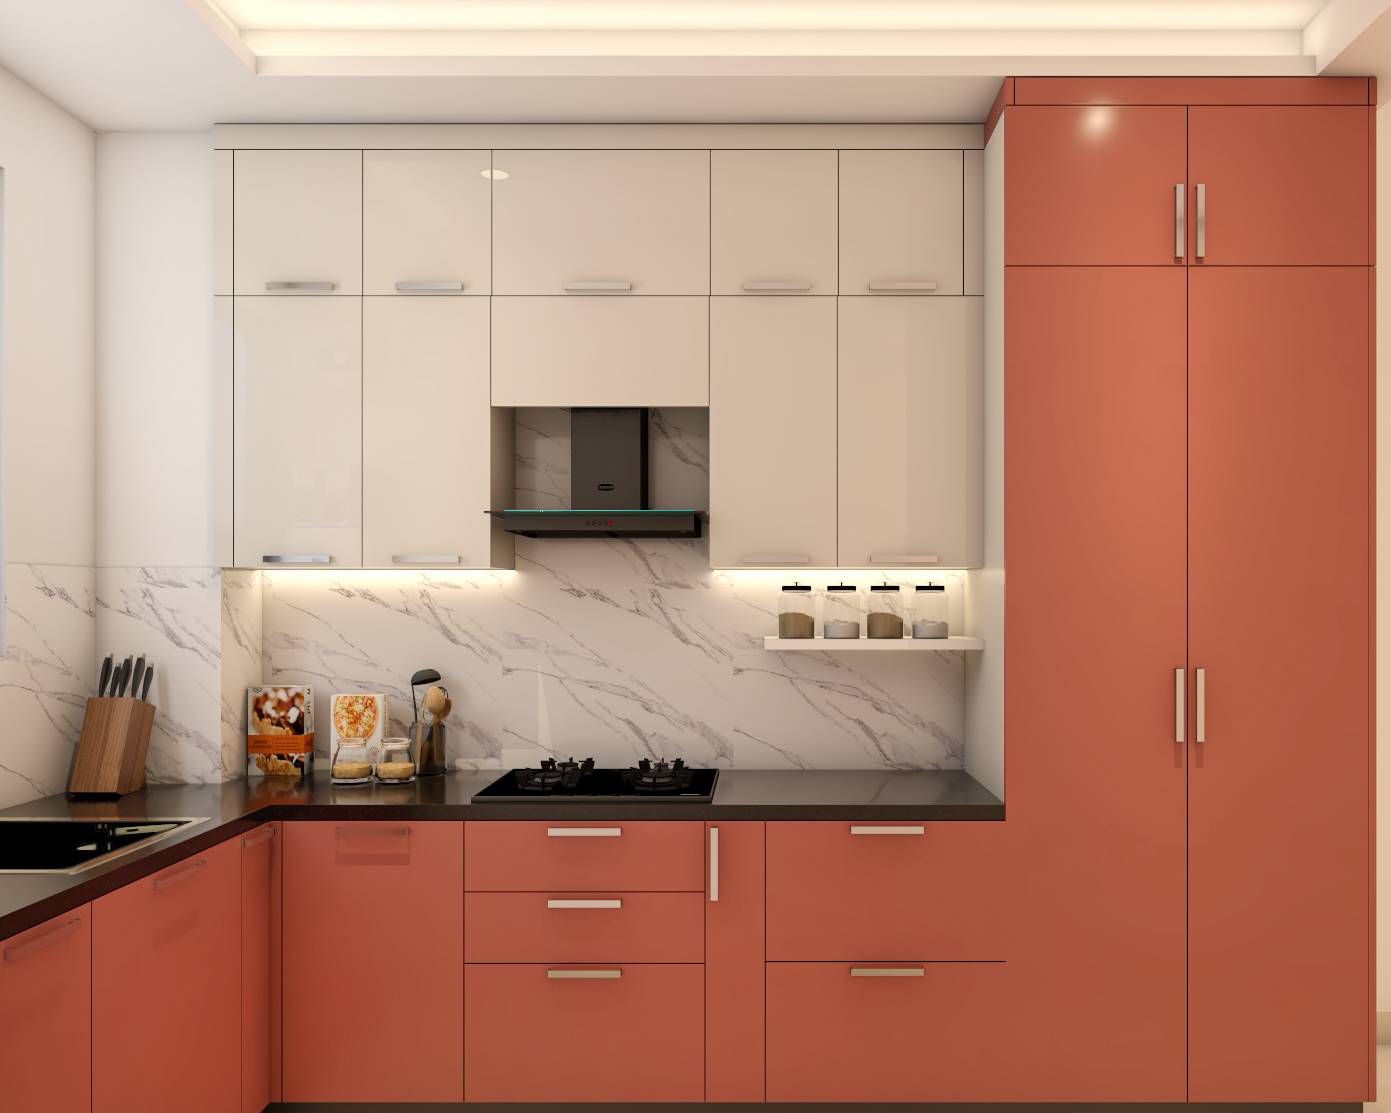 Contemporary Modular Kitchen Design With Rose And White Cabinets